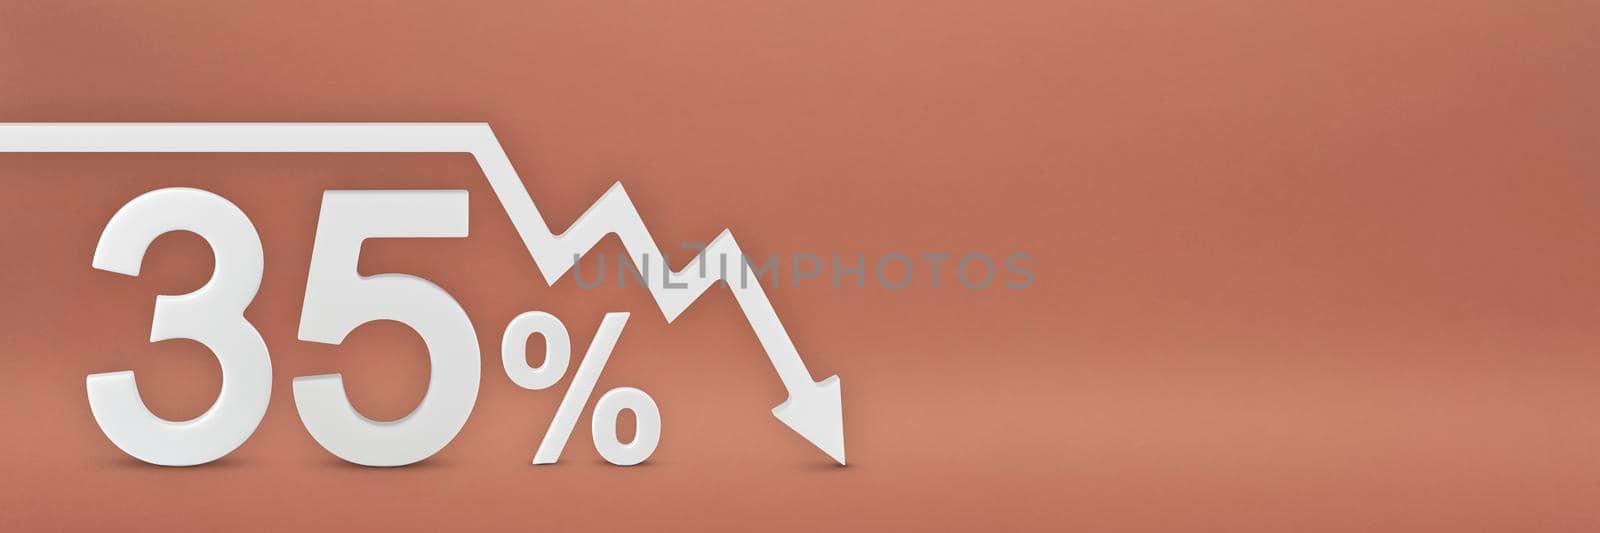 thirty-five percent, the arrow on the graph is pointing down. Stock market crash, bear market, inflation.Economic collapse, collapse of stocks.3d banner,35 percent discount sign on a red background. by SERSOL